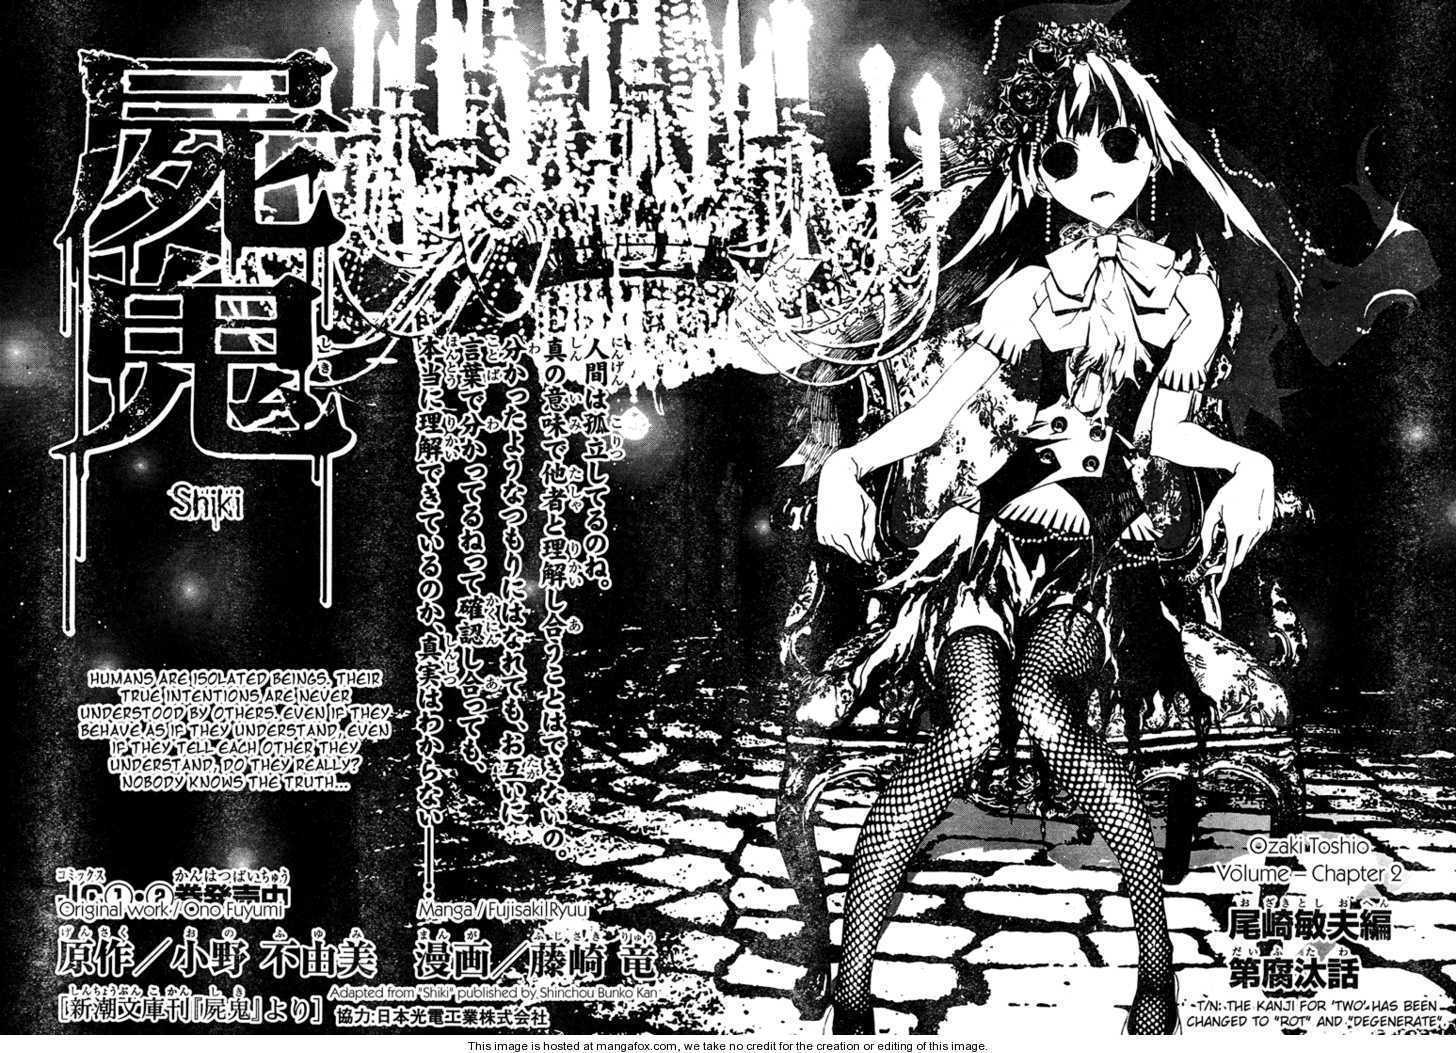 Shiki Vol.3 Chapter 9 : Toshio Ozaki, Part 2: Rotting And Decay - Picture 2